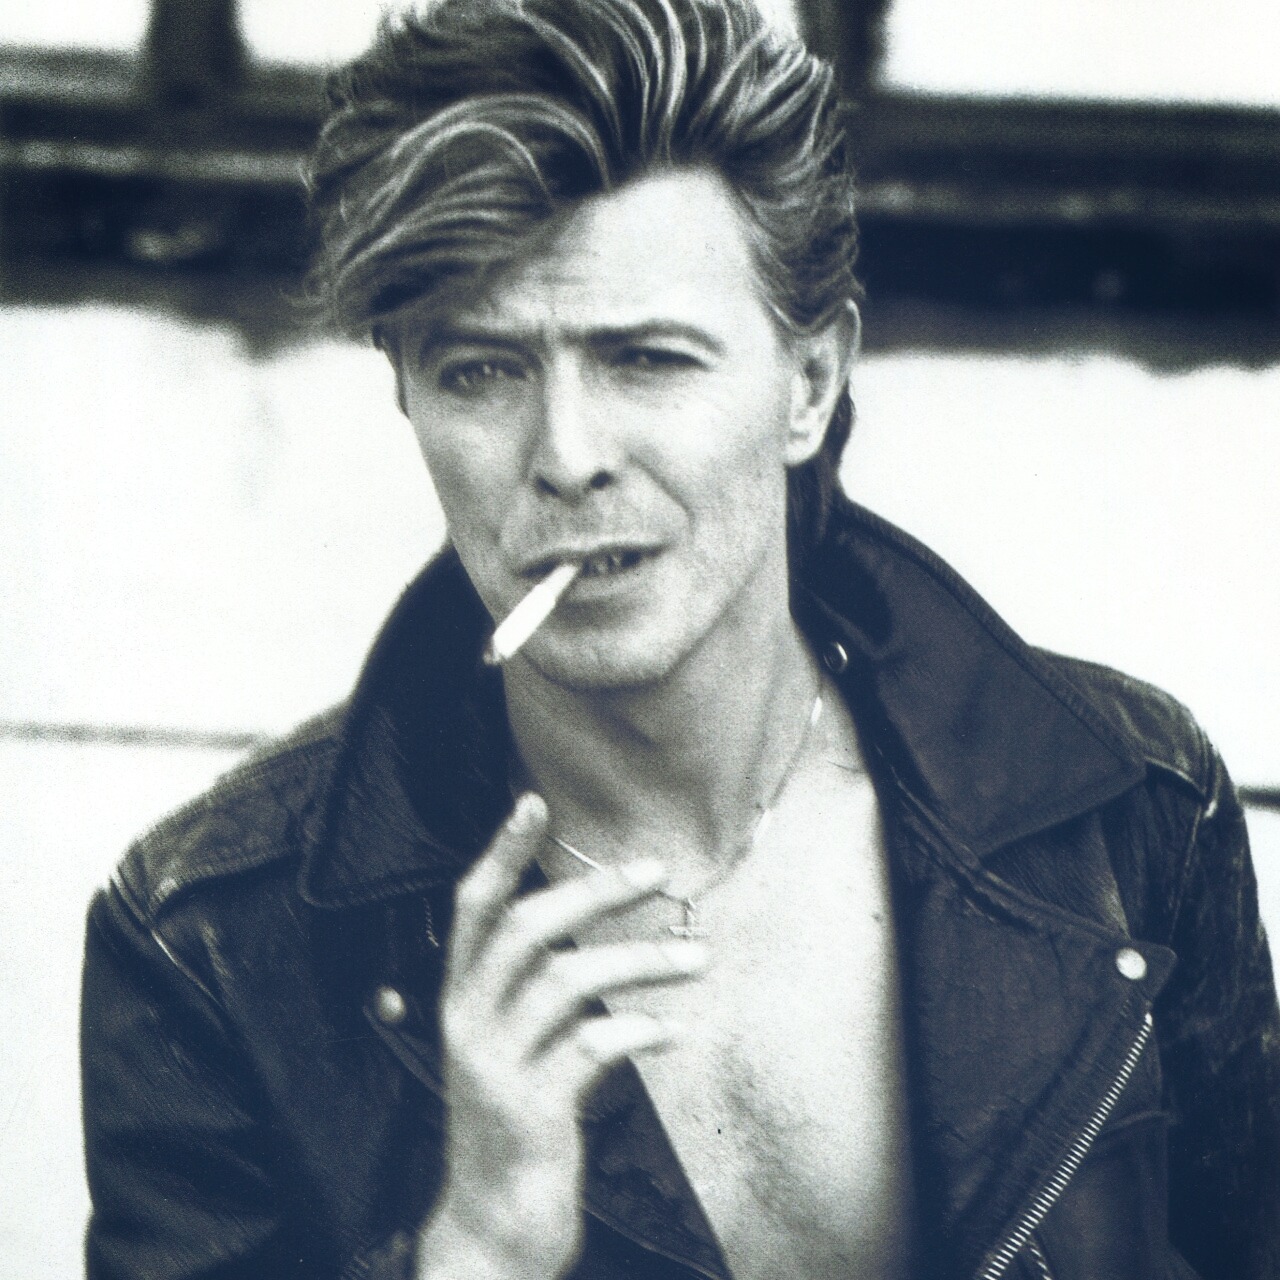 Dreams Unwind Loves A State Of Mind Rest In Peace David Bowie January 8 1947 7609